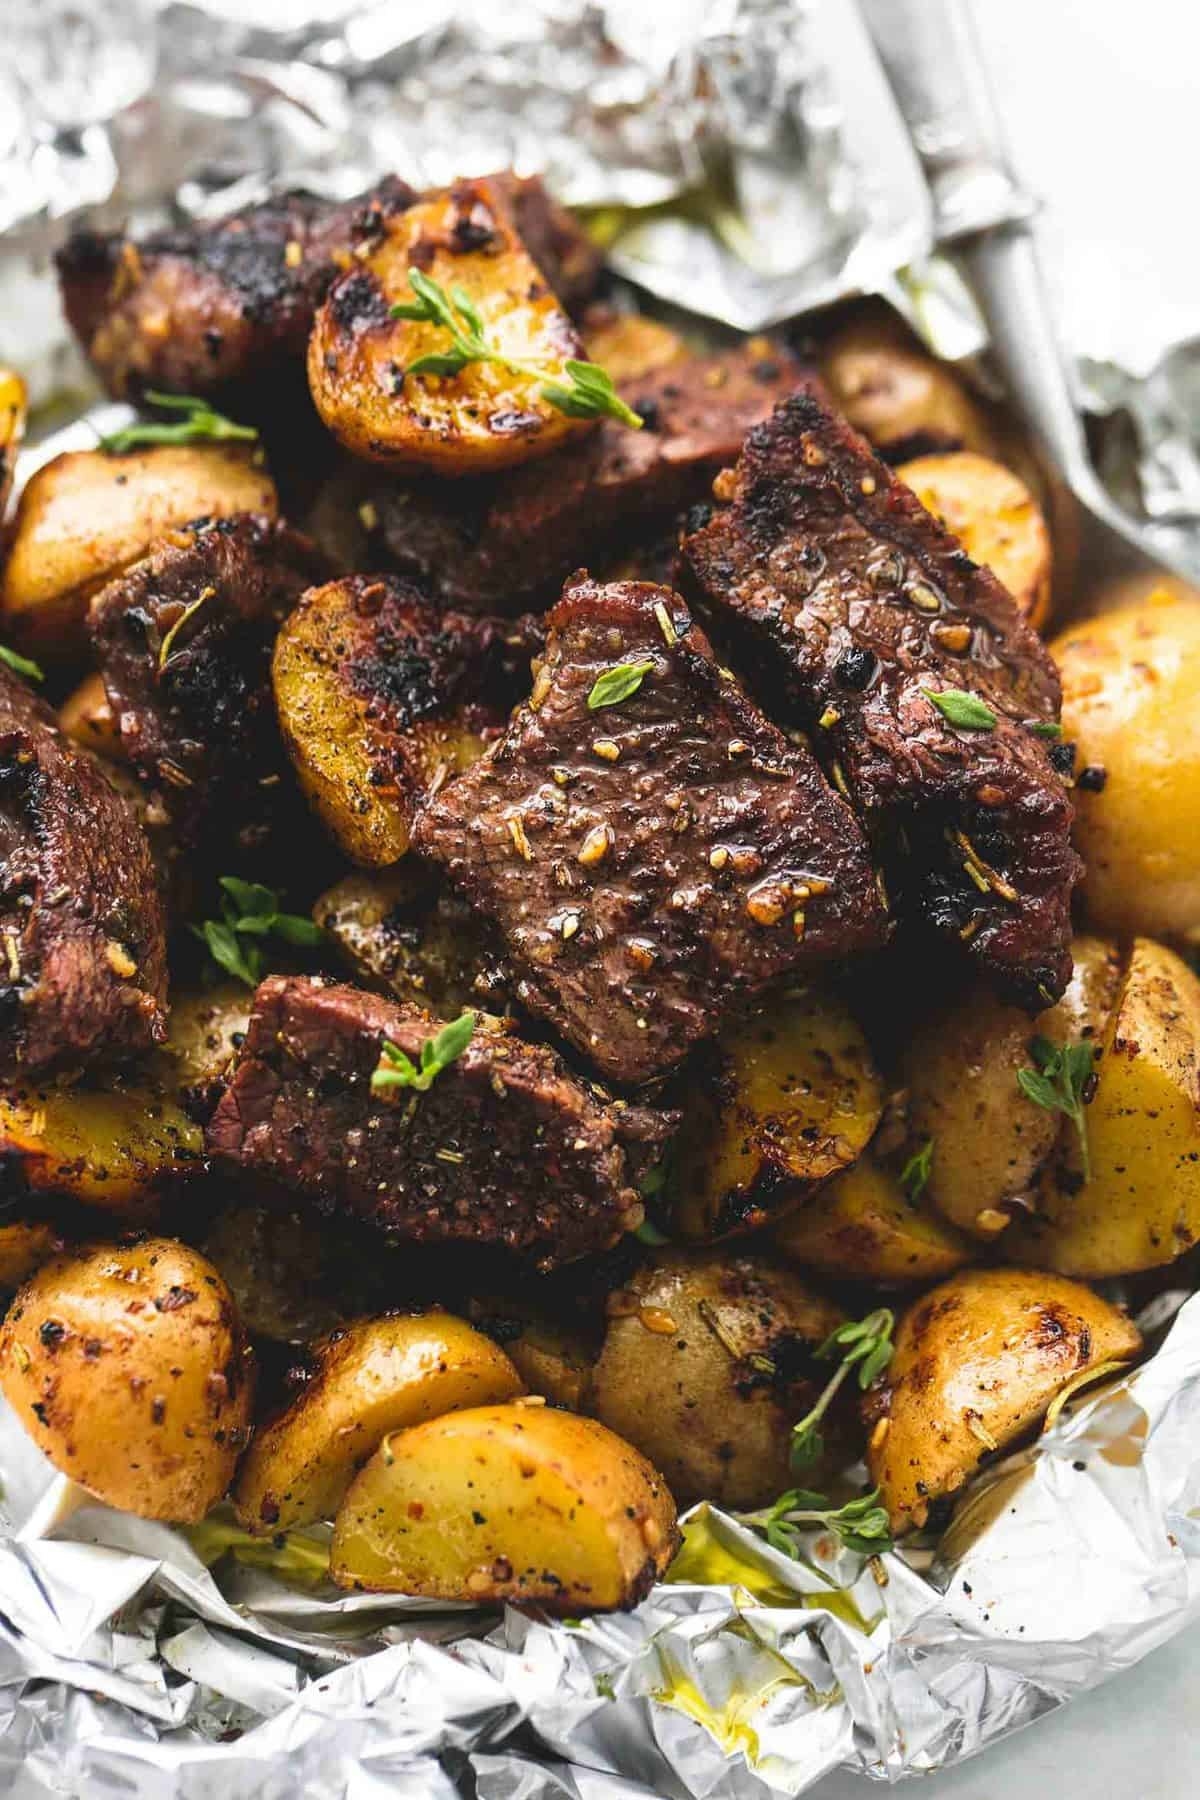 Steak and potatoes in foil